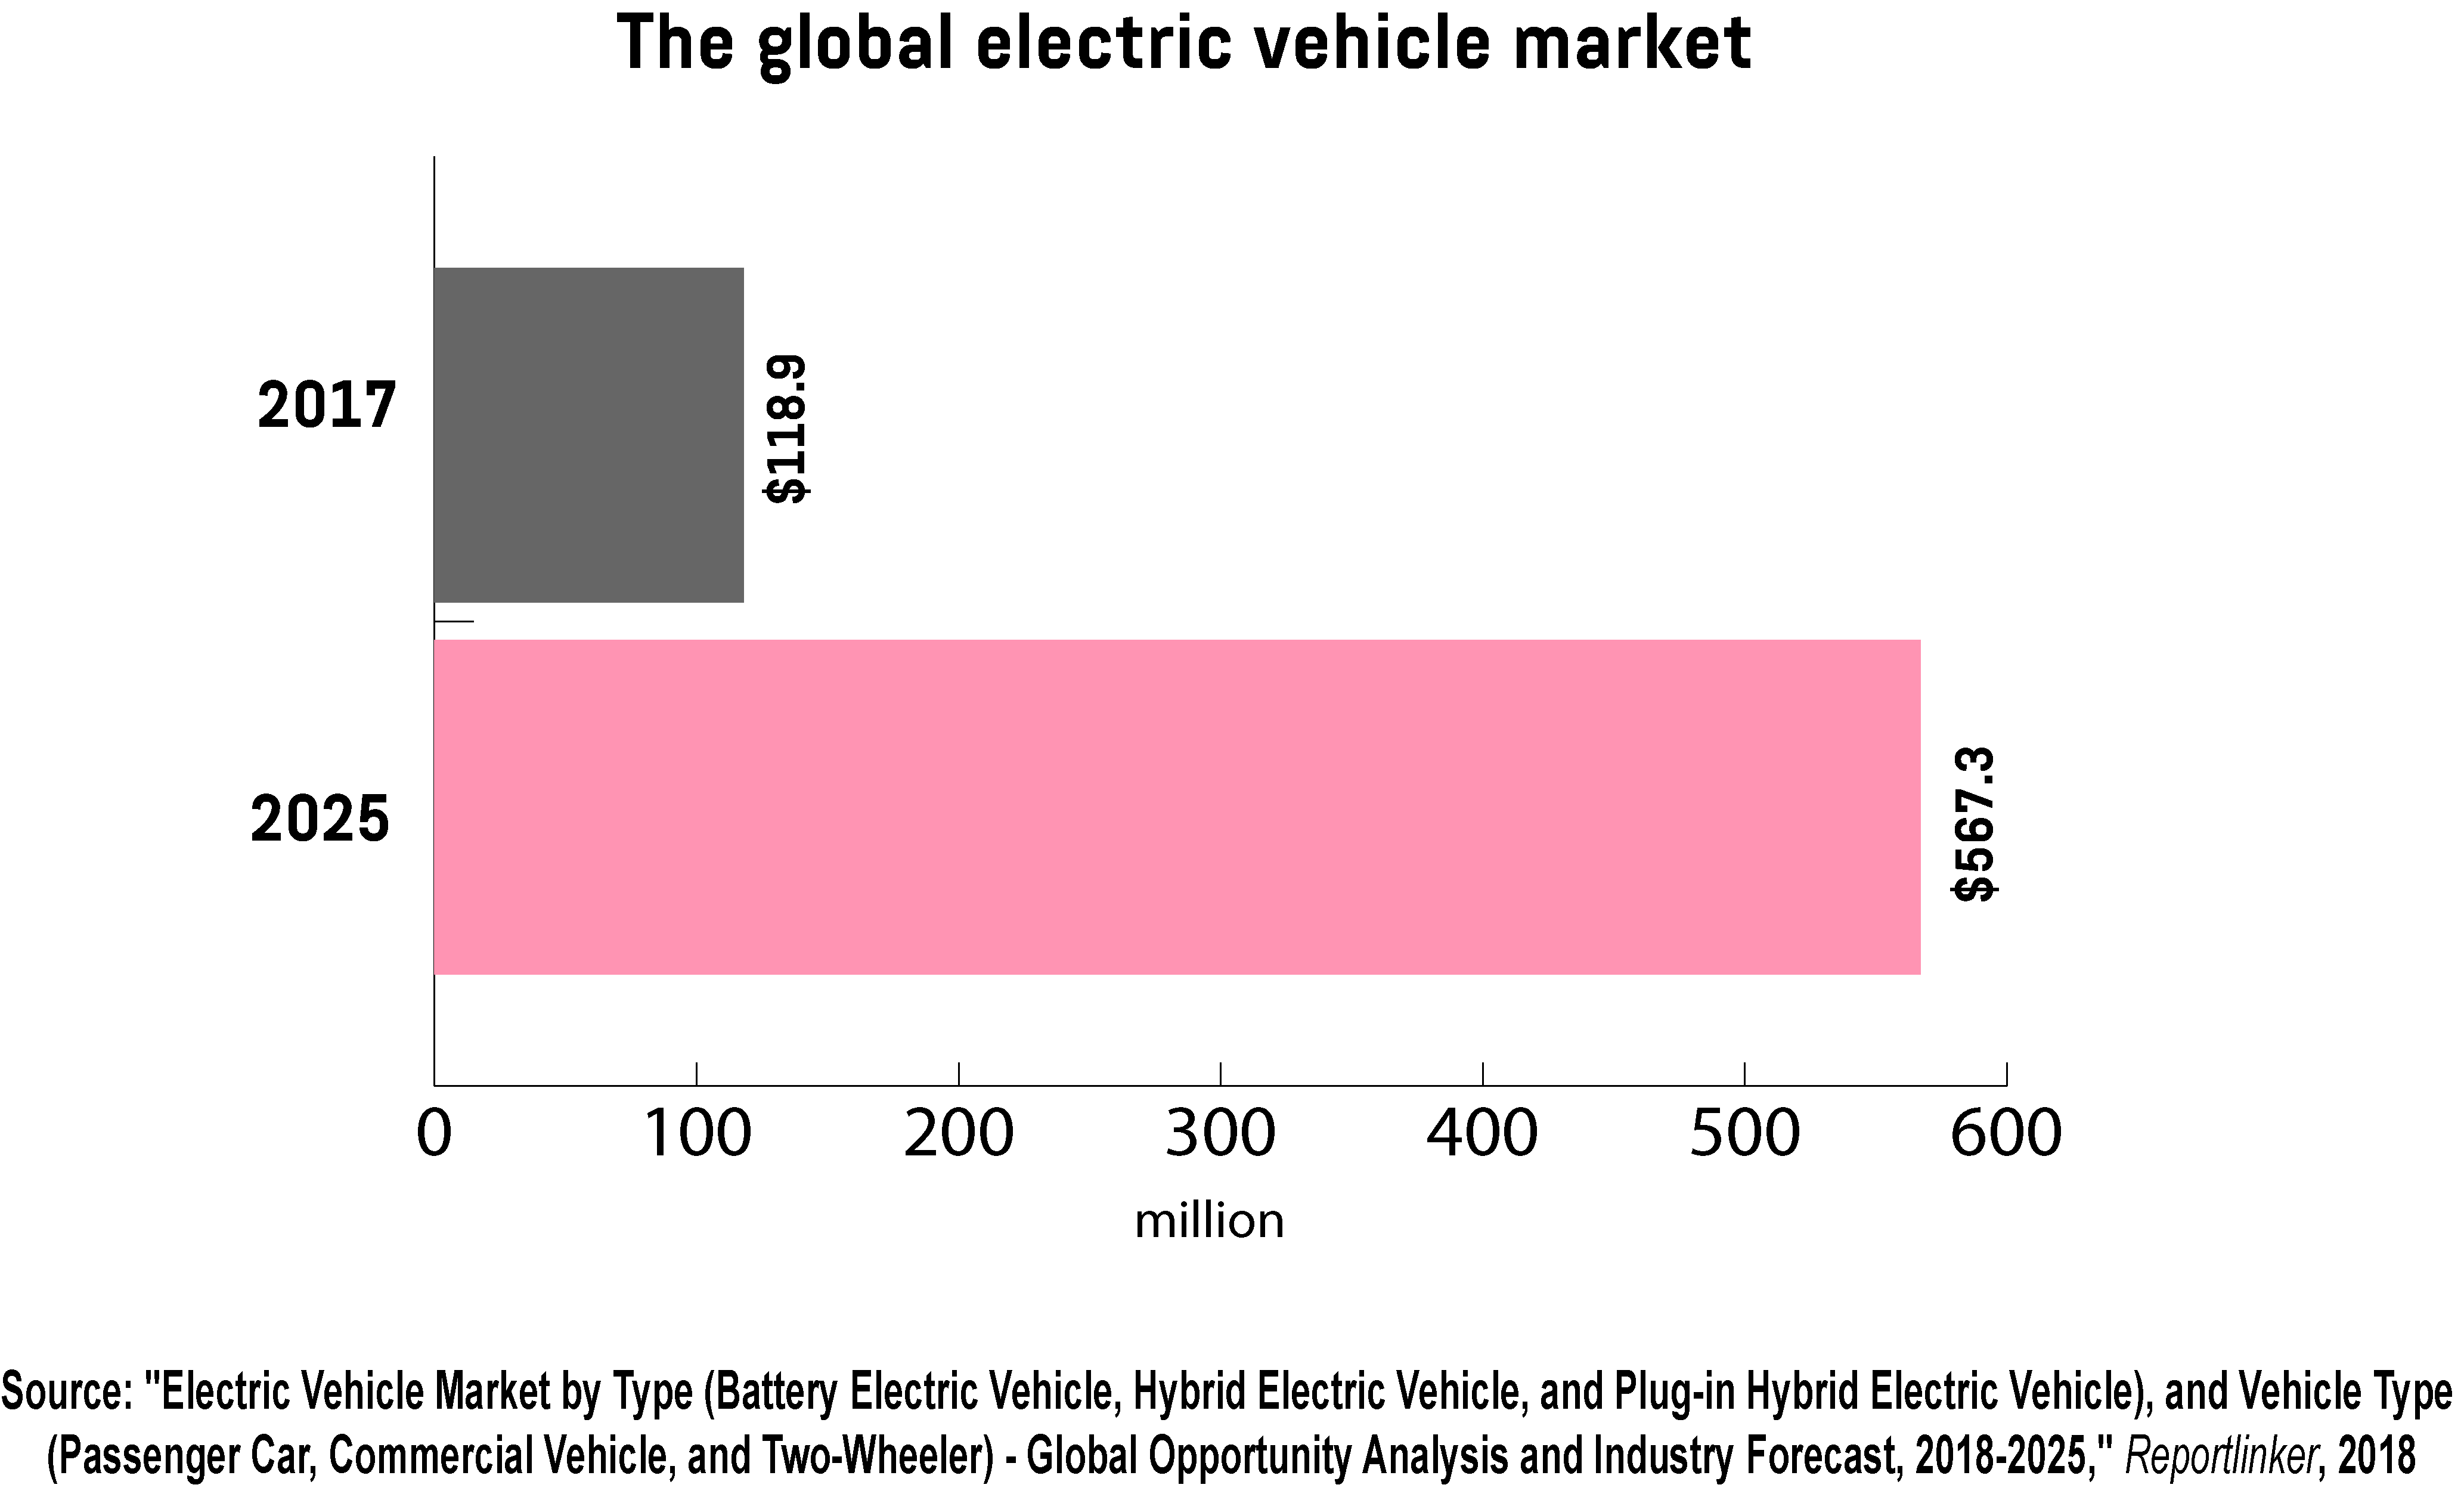  A graph showing the growth of the global electric vehicle market between 2017 and 2025.